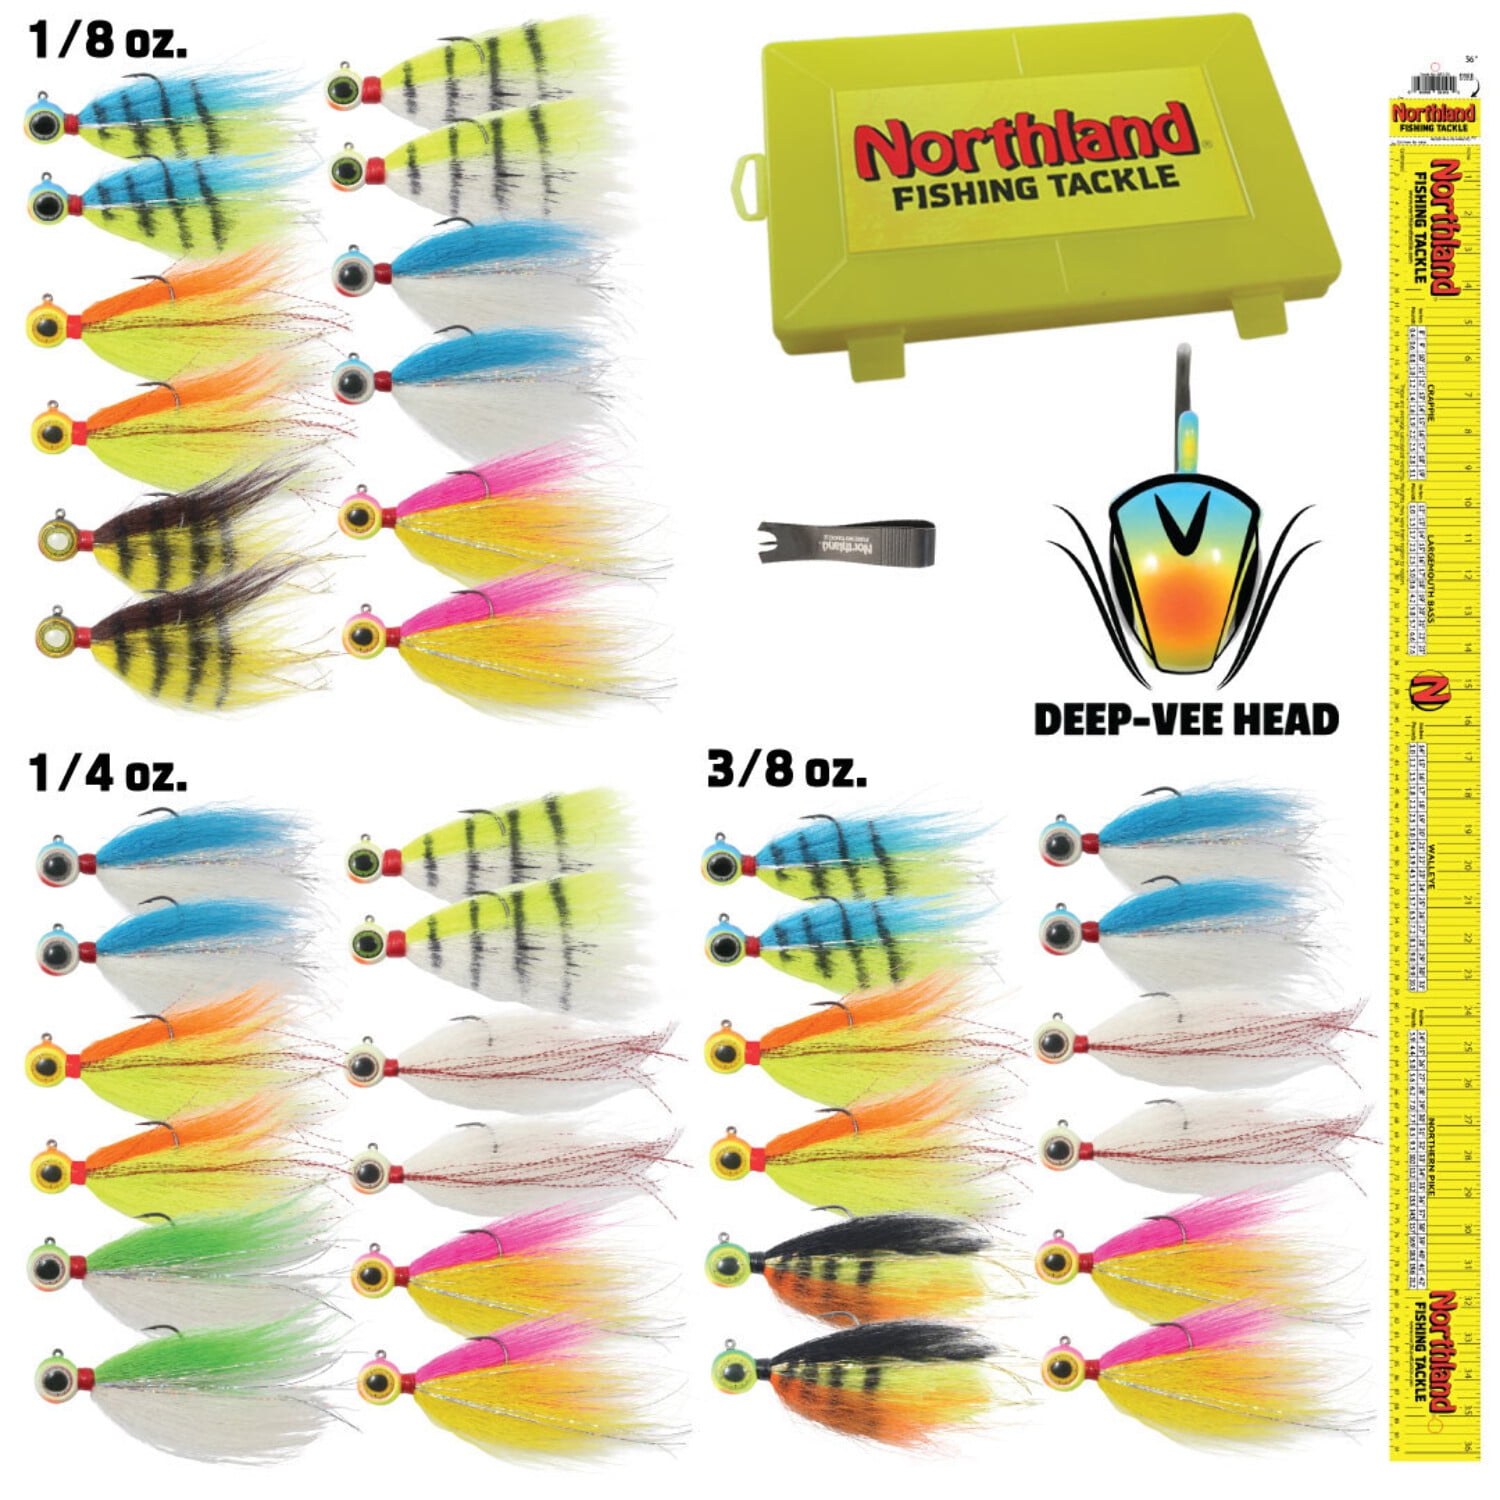 Crappie-Jig-Marabou-Feather-Jigs-for-Crappie-Fishing-Lures kit 50 Pack  Panfish Sunfish Hair Jig Bait 1/8 1/16 1/32 oz